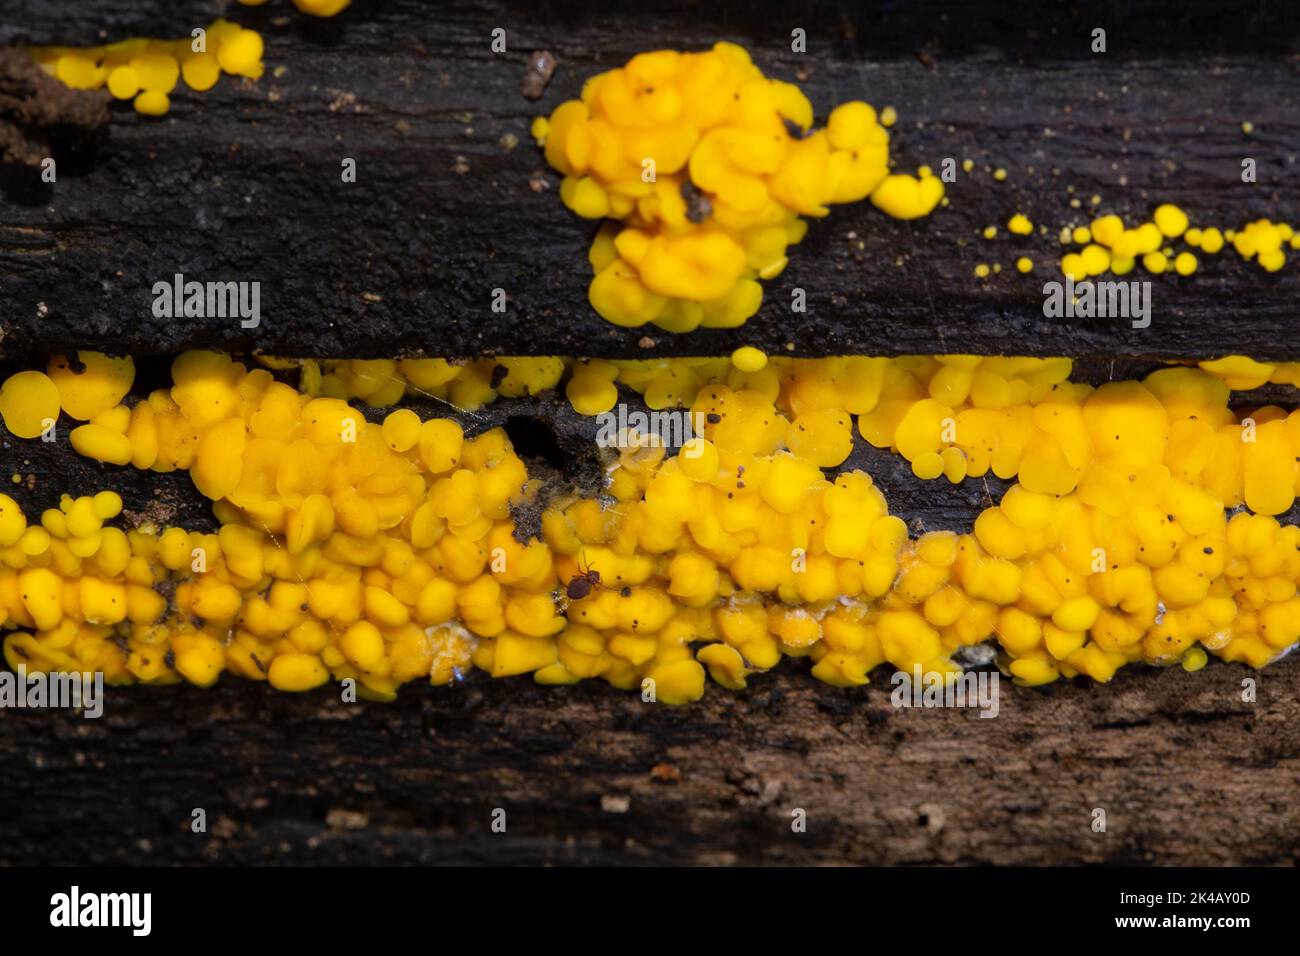 Lemon yellow brushwood cup many yellow fruit bodies next to each other on tree trunk Stock Photo